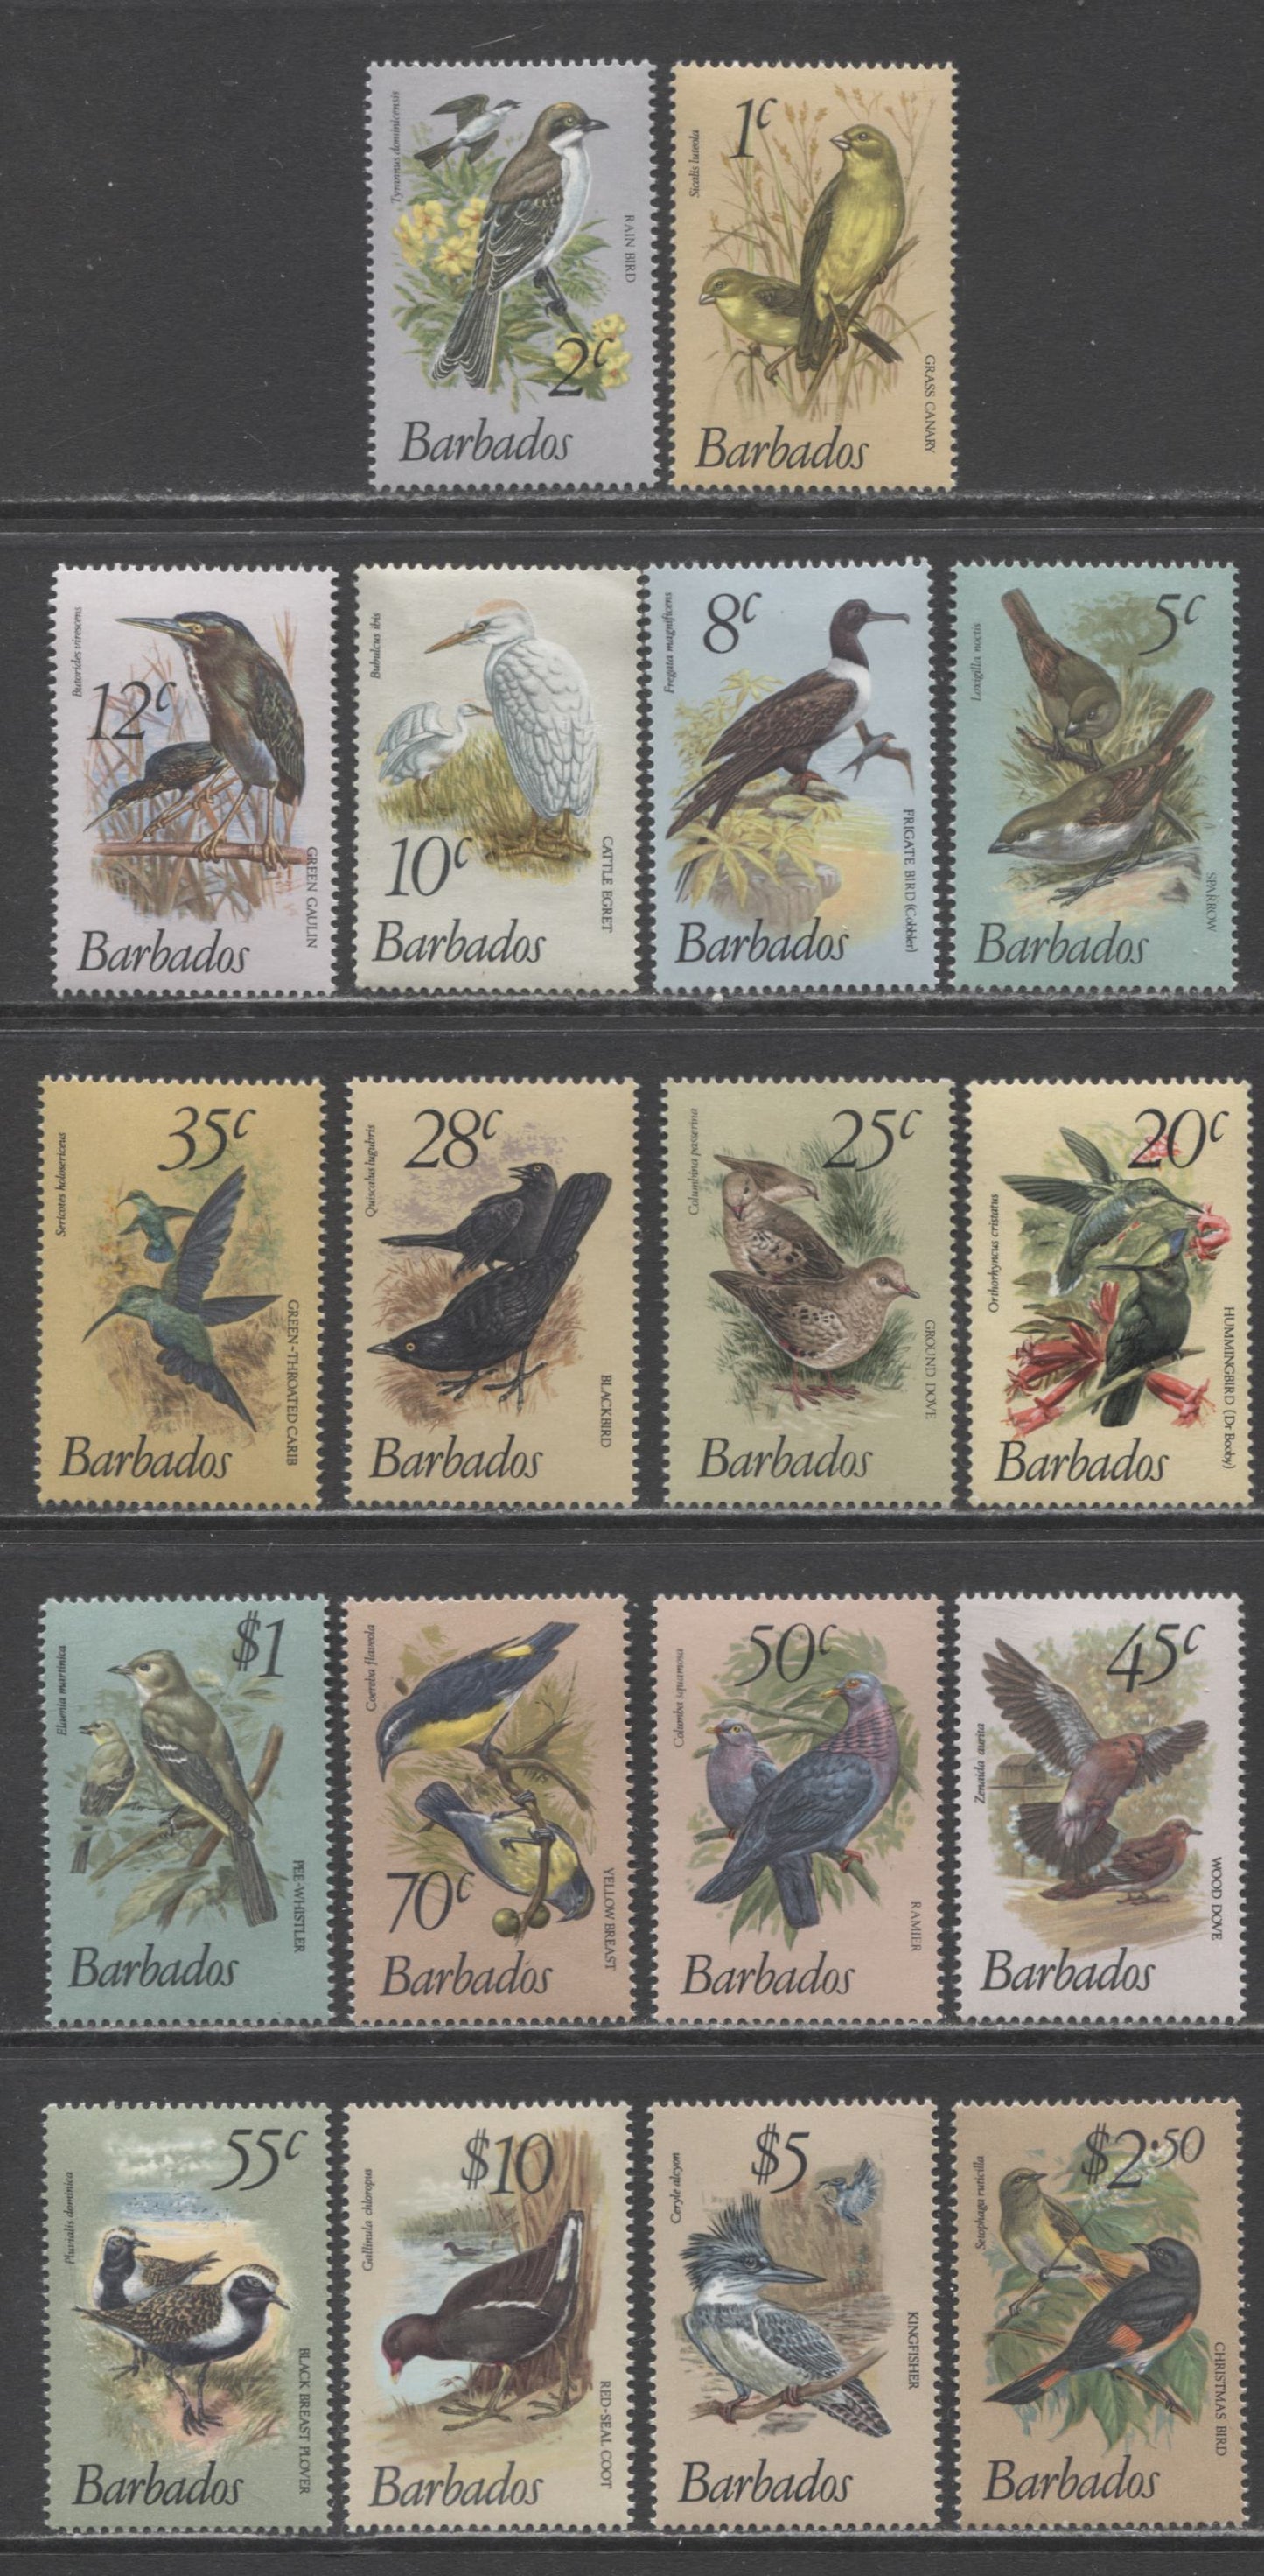 Lot 69 Barbados SC#495-511 1979-1981 Bird Definitives, 18 VFOG Singles, Click on Listing to See ALL Pictures, Estimated Value $20